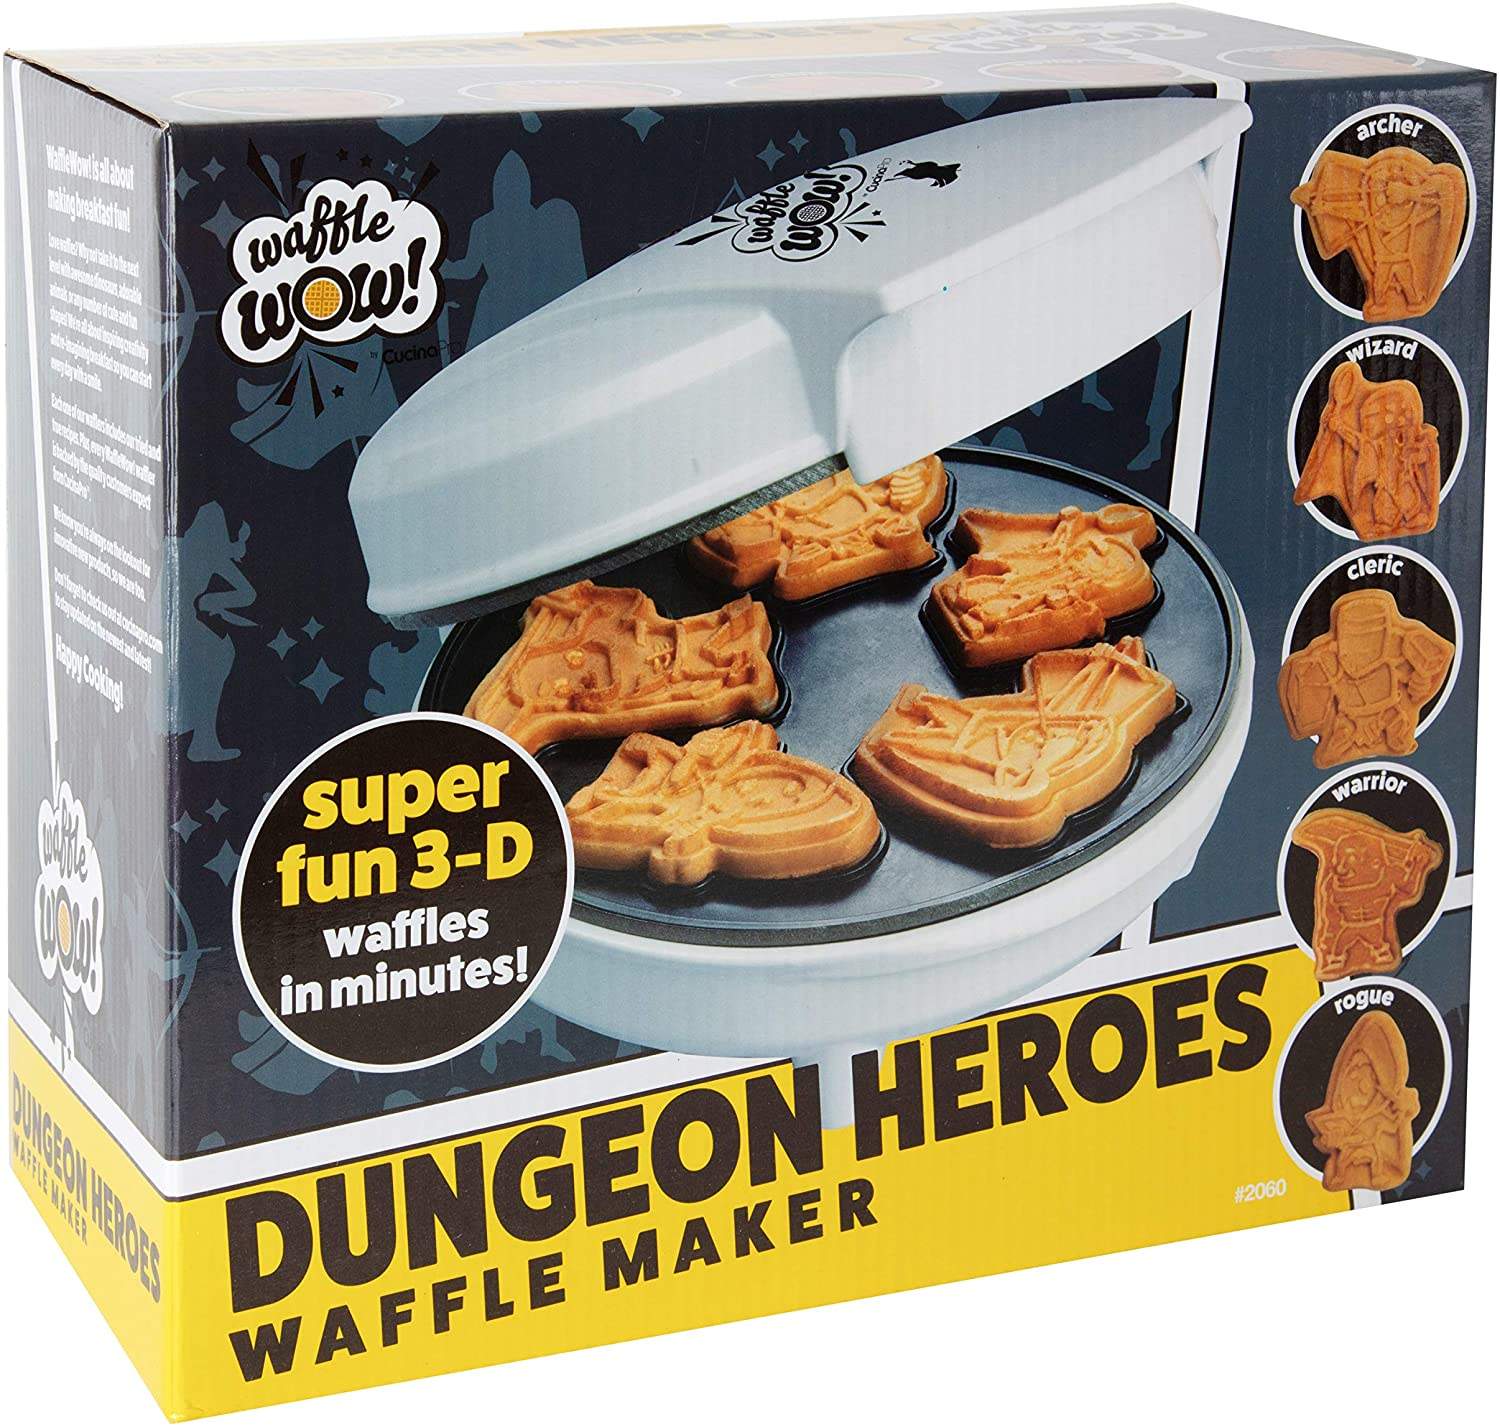 Add this waffle maker to your D&D campaign for critical deliciousness